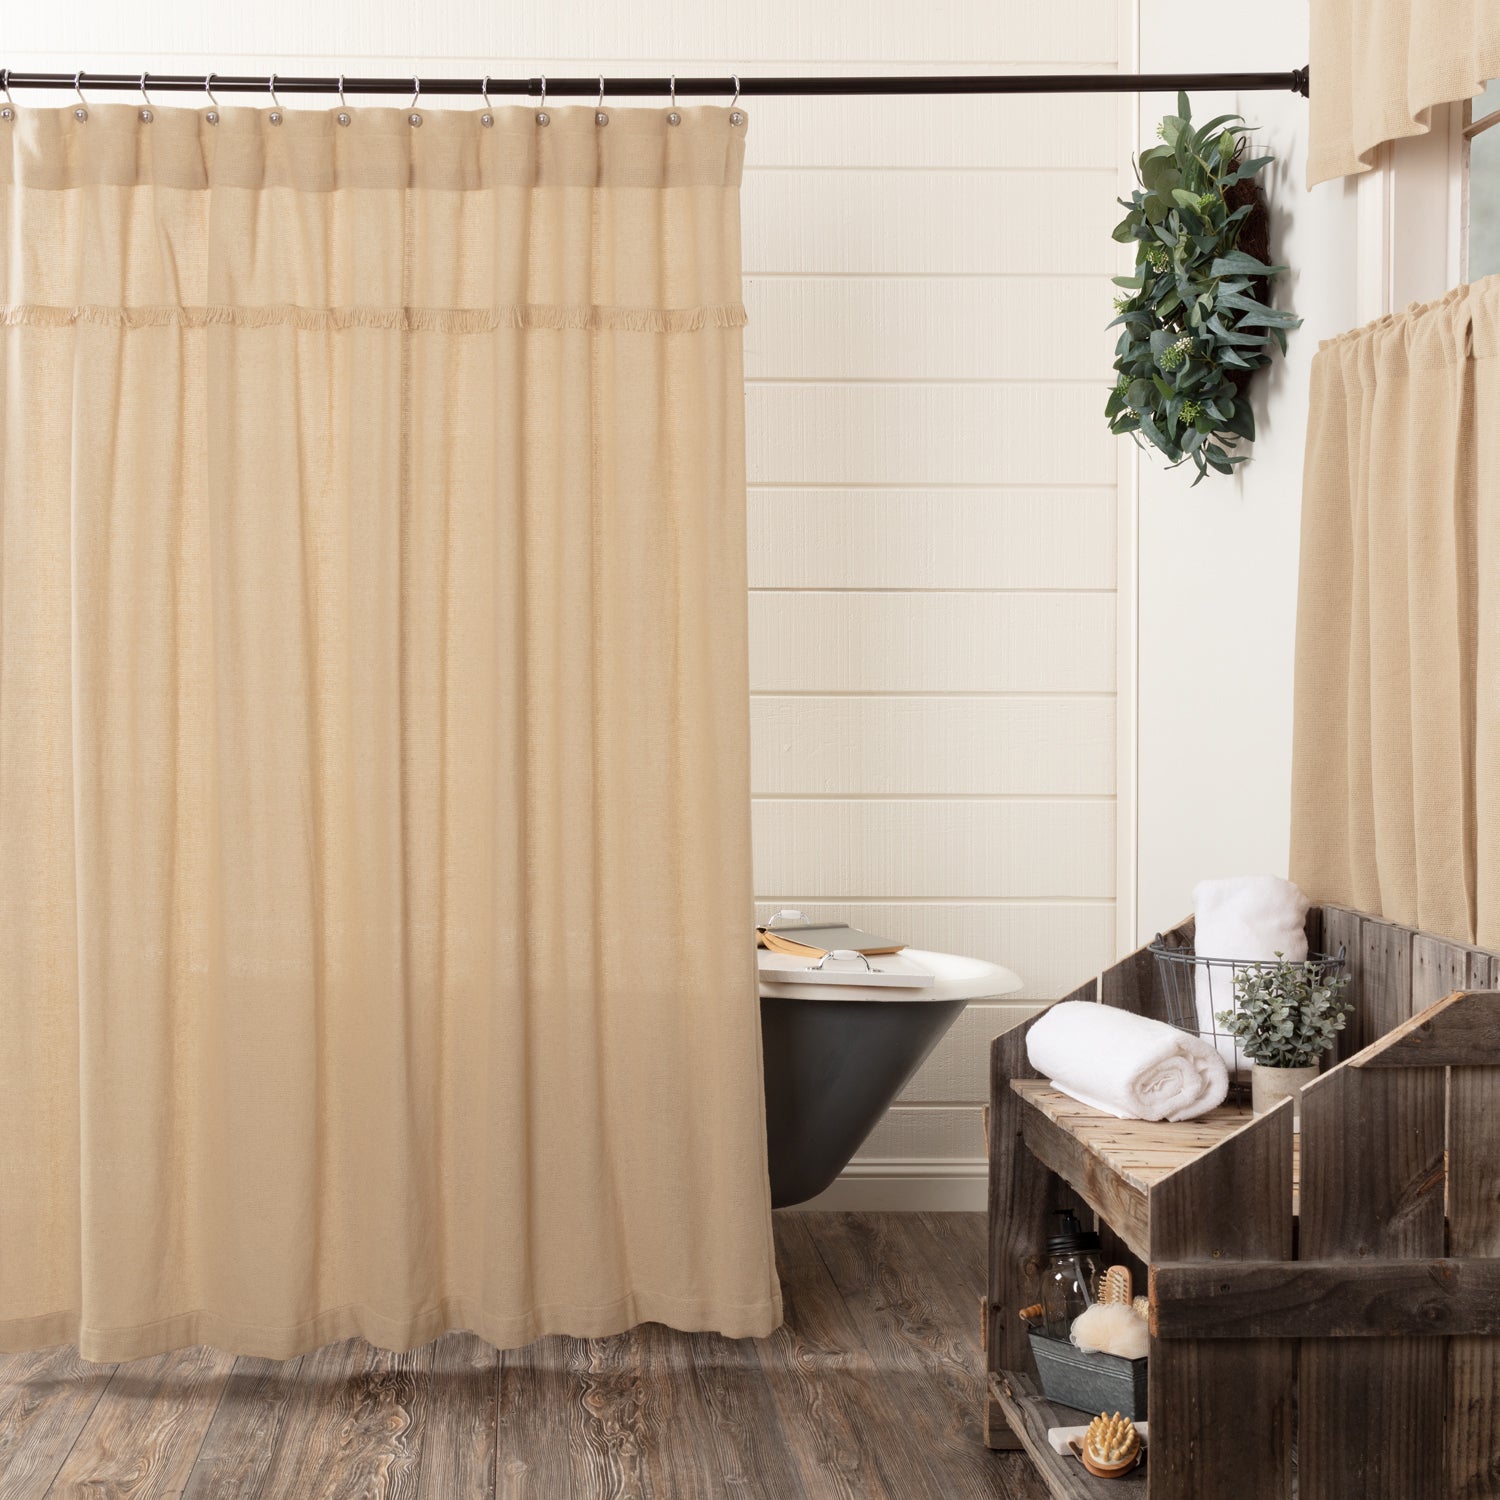 Ambesonne Outhouse Shower Curtain, Old Wooden Shed in The Outback Country Side Olive Trees, Cloth Fabric Bathroom Decor Set with Hooks, 69 W x 70